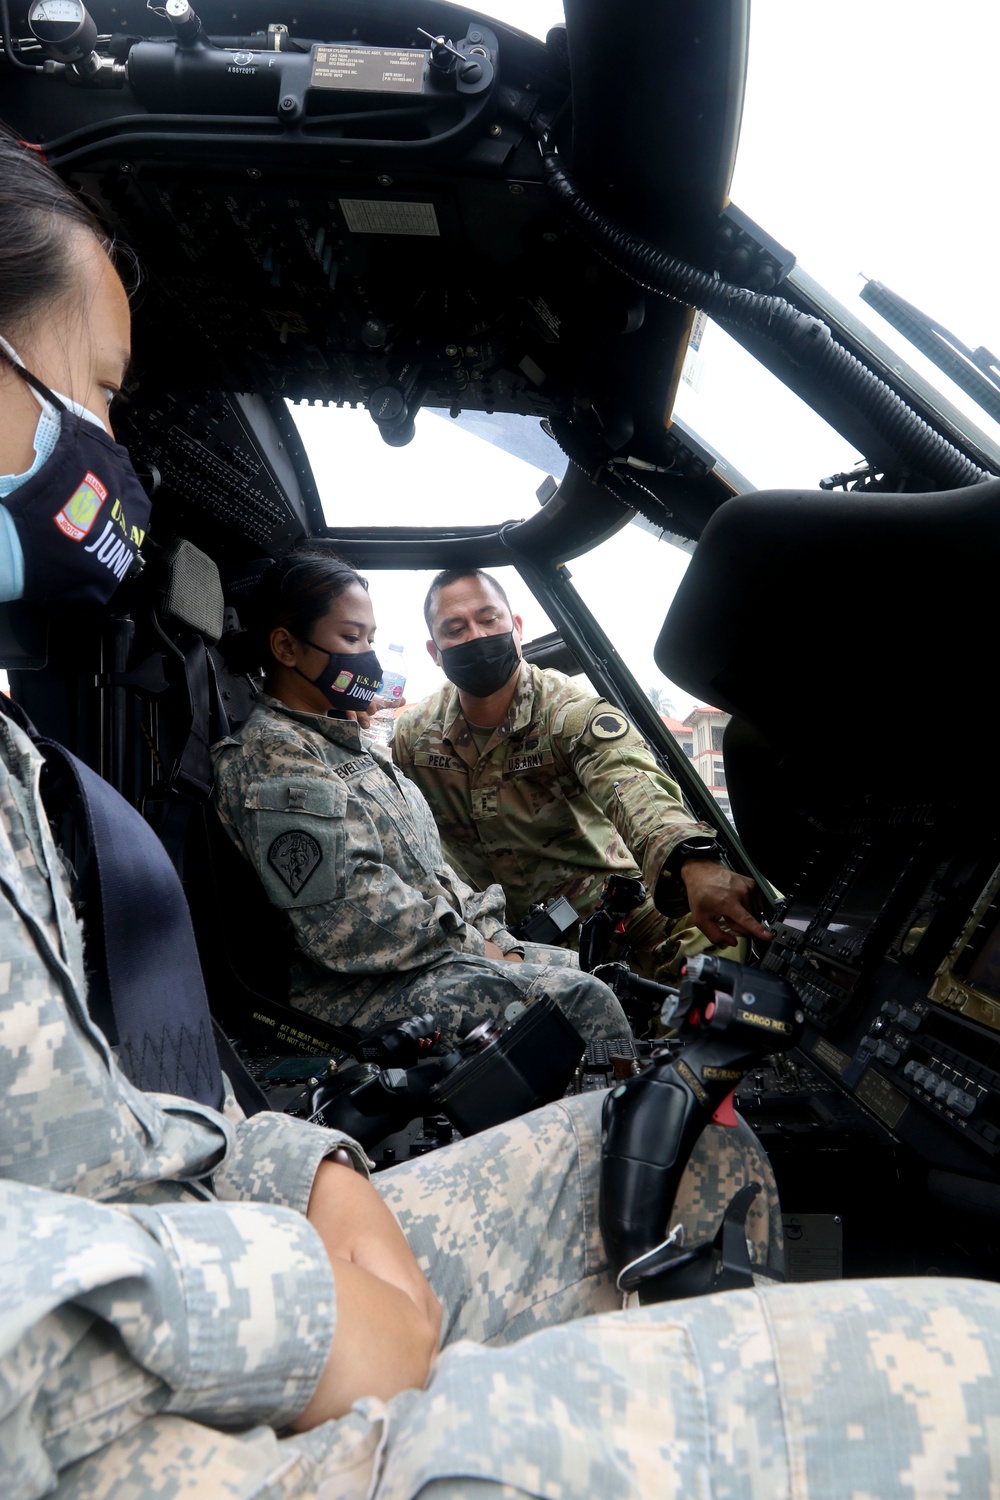 HIARNG displays aviation opportunities for JROTC students